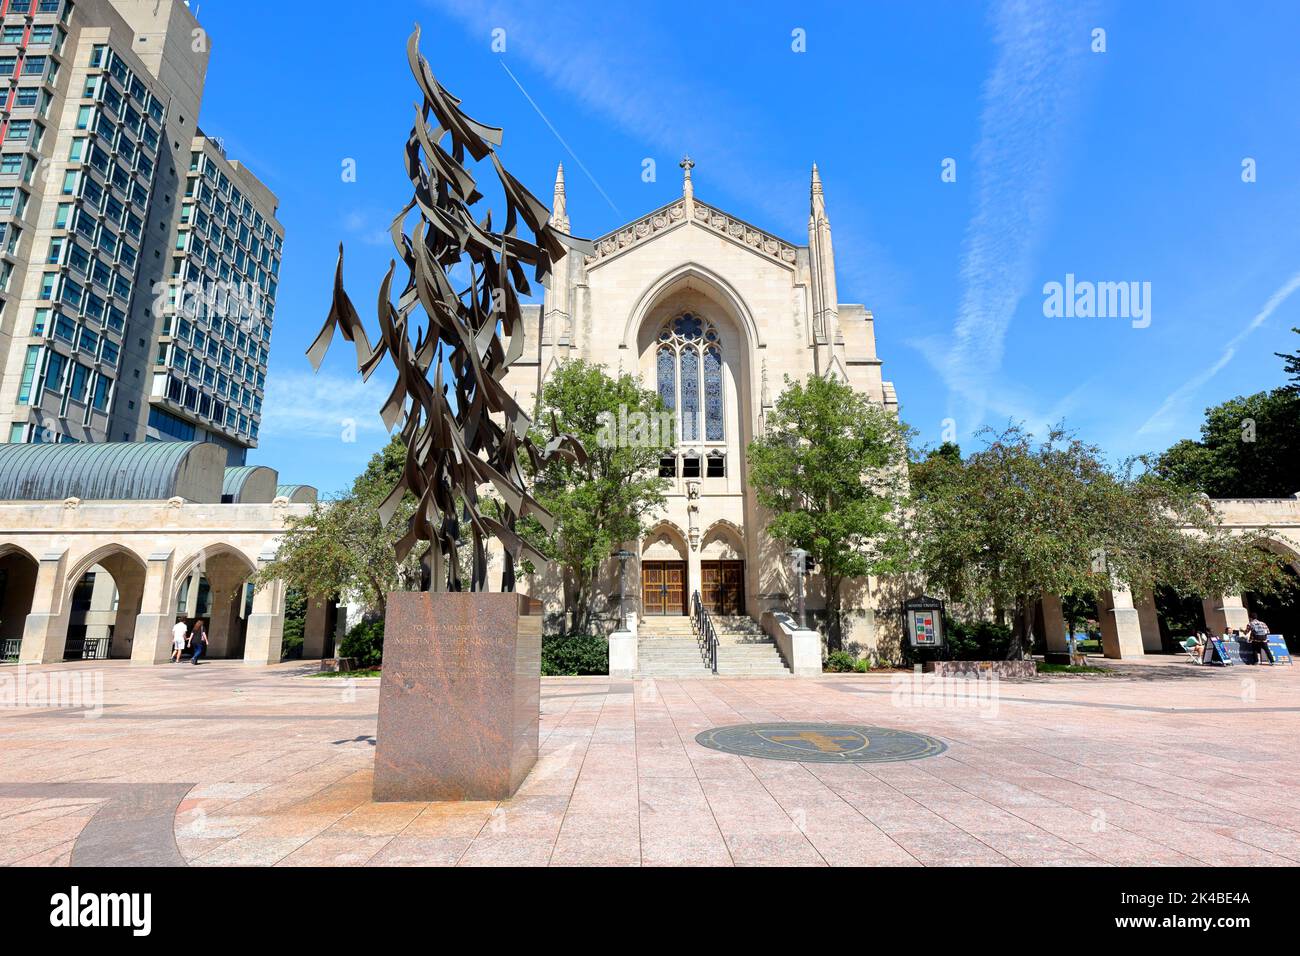 Marsh Chapel, and 'Free at Last' sculpture in memory to Martin Luther King Jr at Boston University, Boston, Massachusetts. Stock Photo